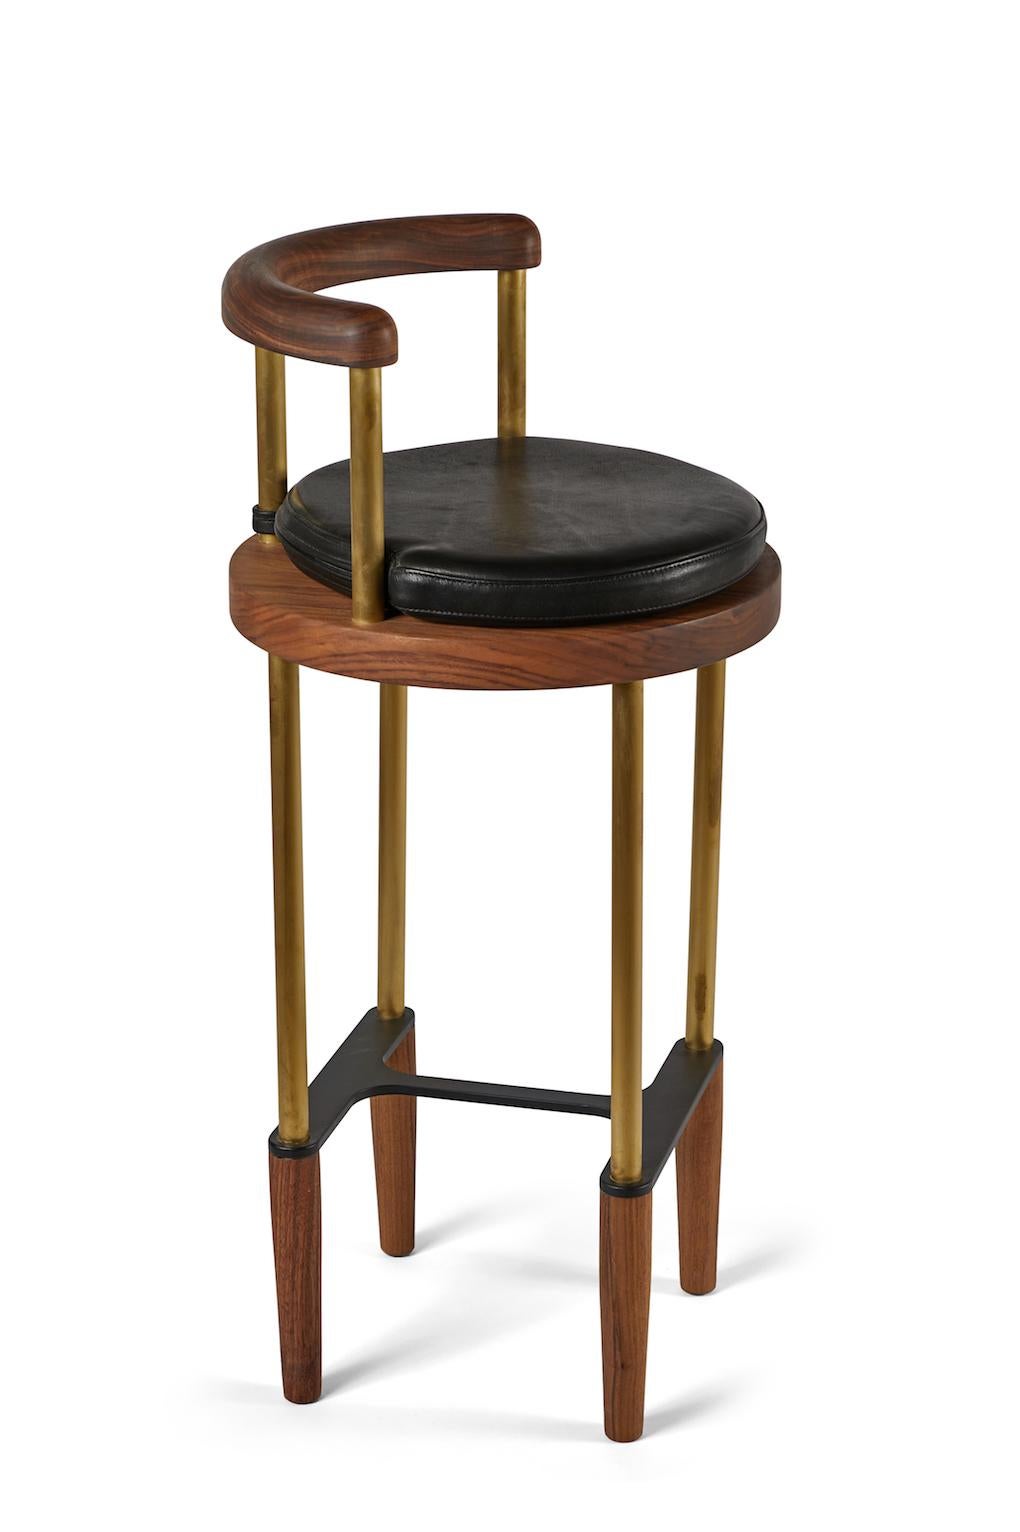 Bone bar stool in oiled walnut with brass legs and removable cushion. Made in the USA by Casey McCafferty.

Available finishes:
Oiled black walnut, oiled white oak, bleached white oak, charred ash, oxidized maple

COM (customers own material)